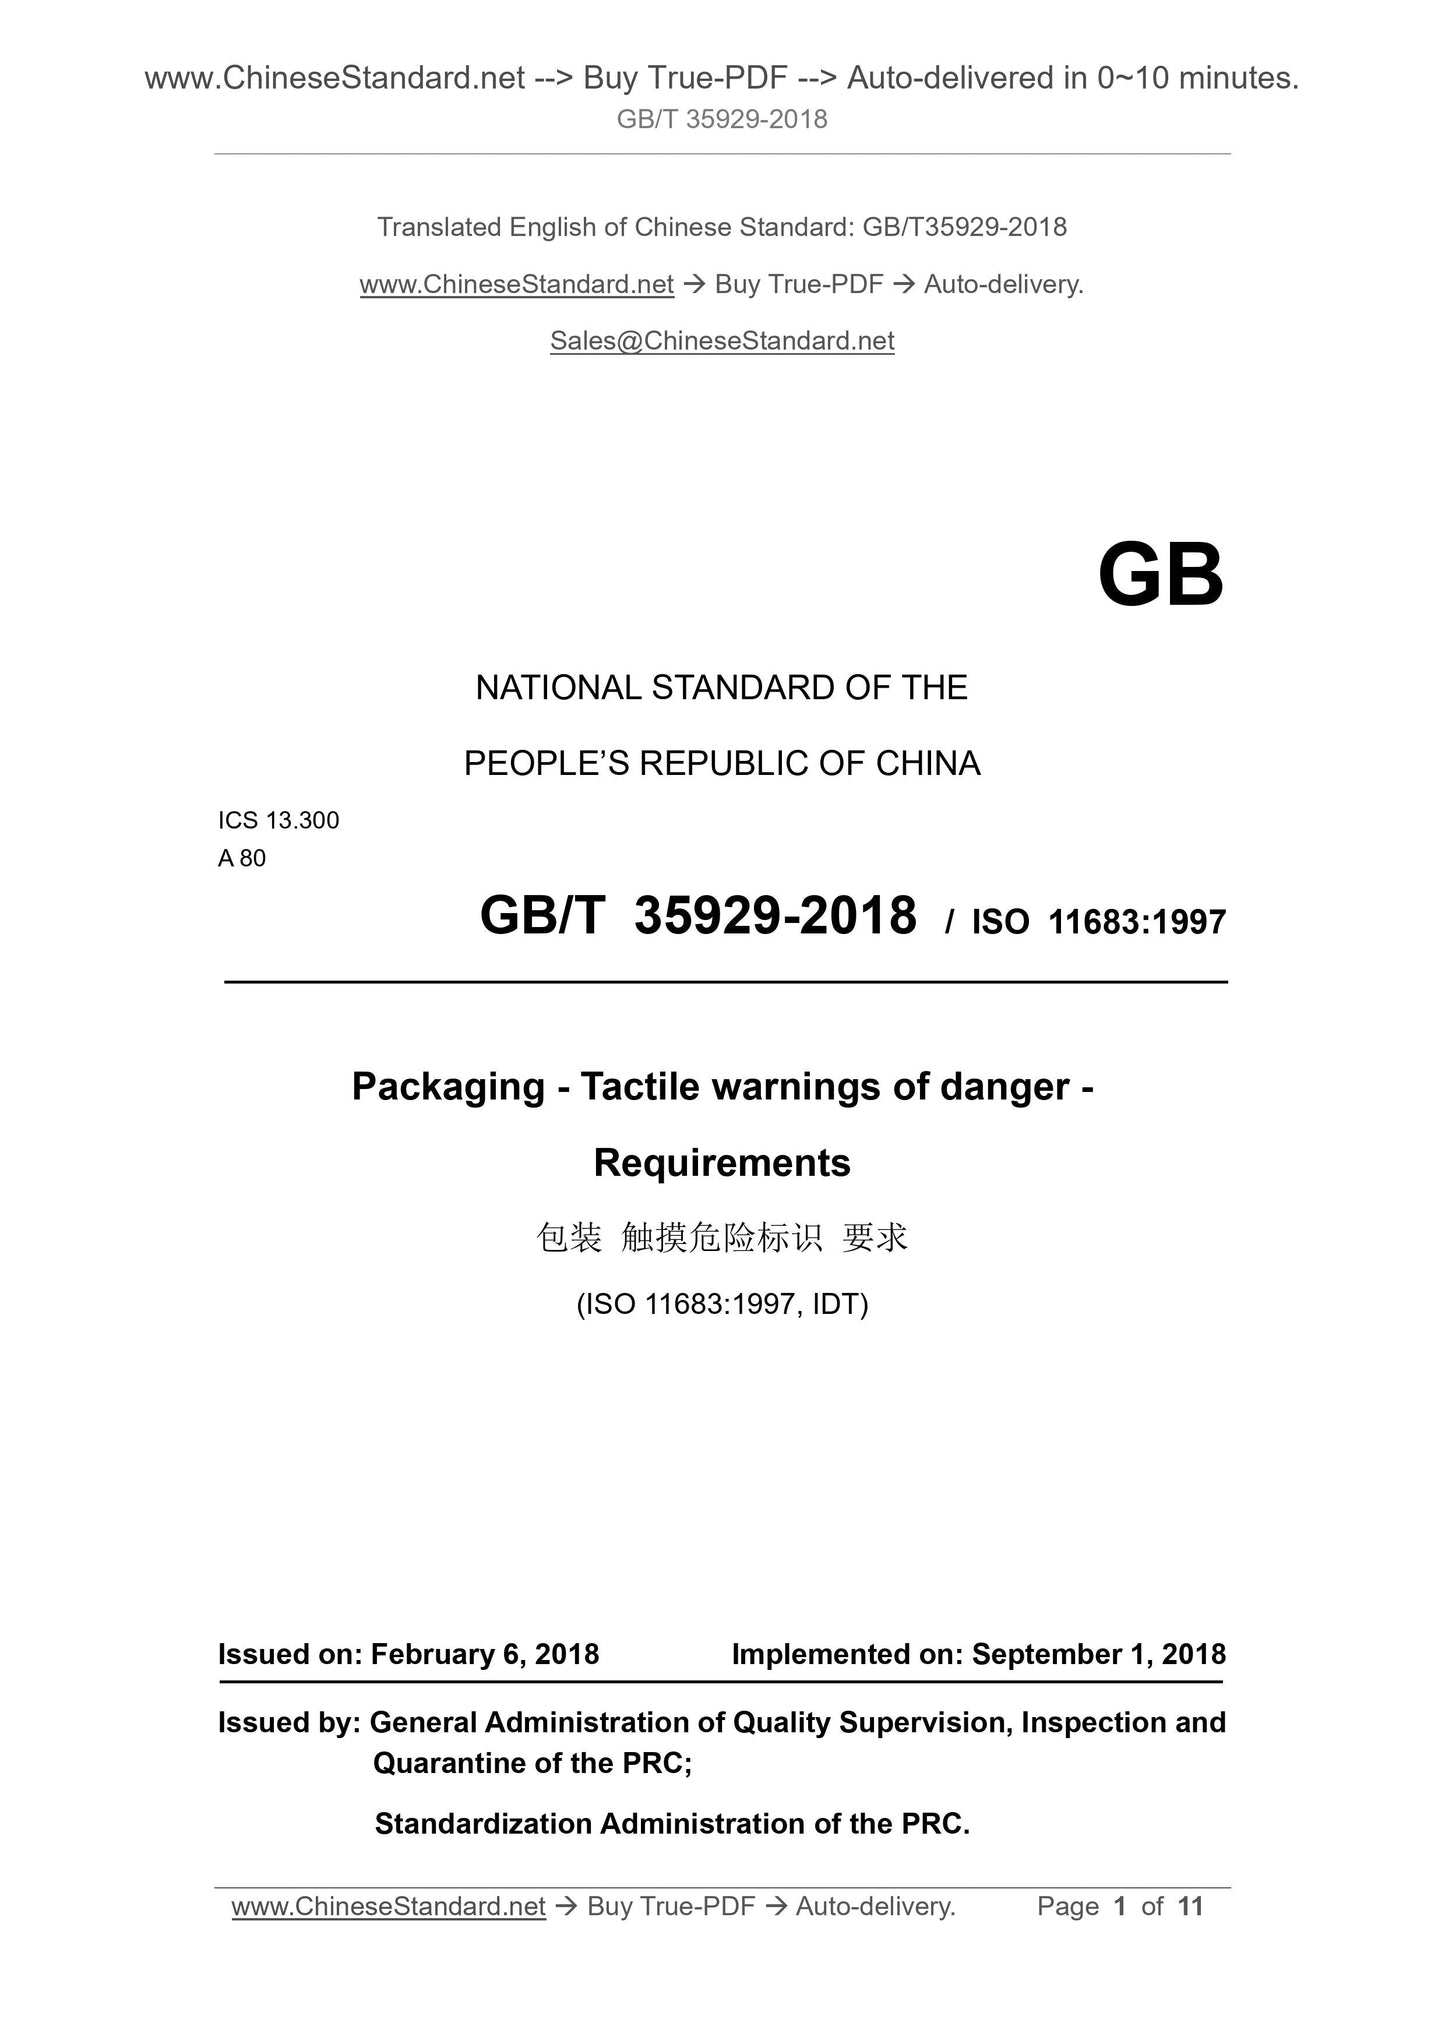 GB/T 35929-2018 Page 1